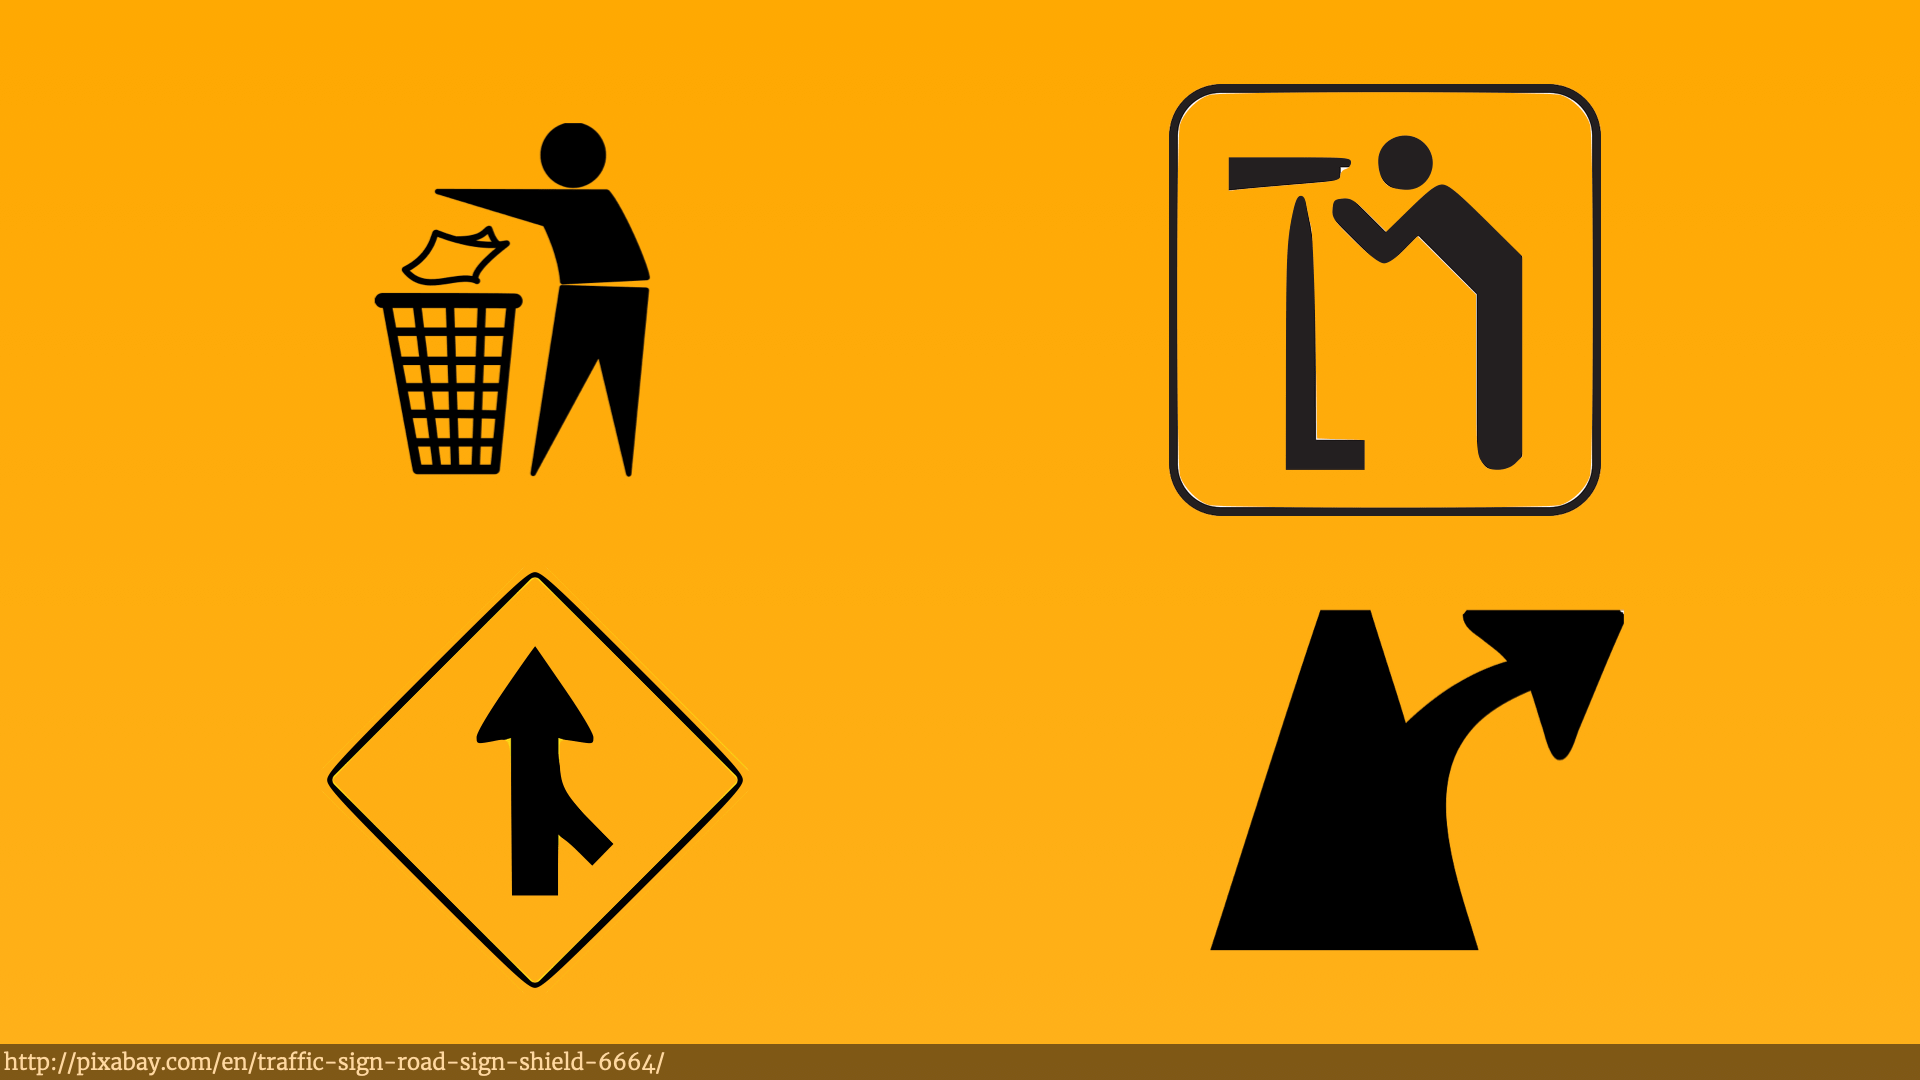 Four illustrations. Top-left somebody throwing something into a bin. Top-right somebody looking through a telescope. Bottom-left a sign for merging lanes. Bottom-right a sign for splitting lanes